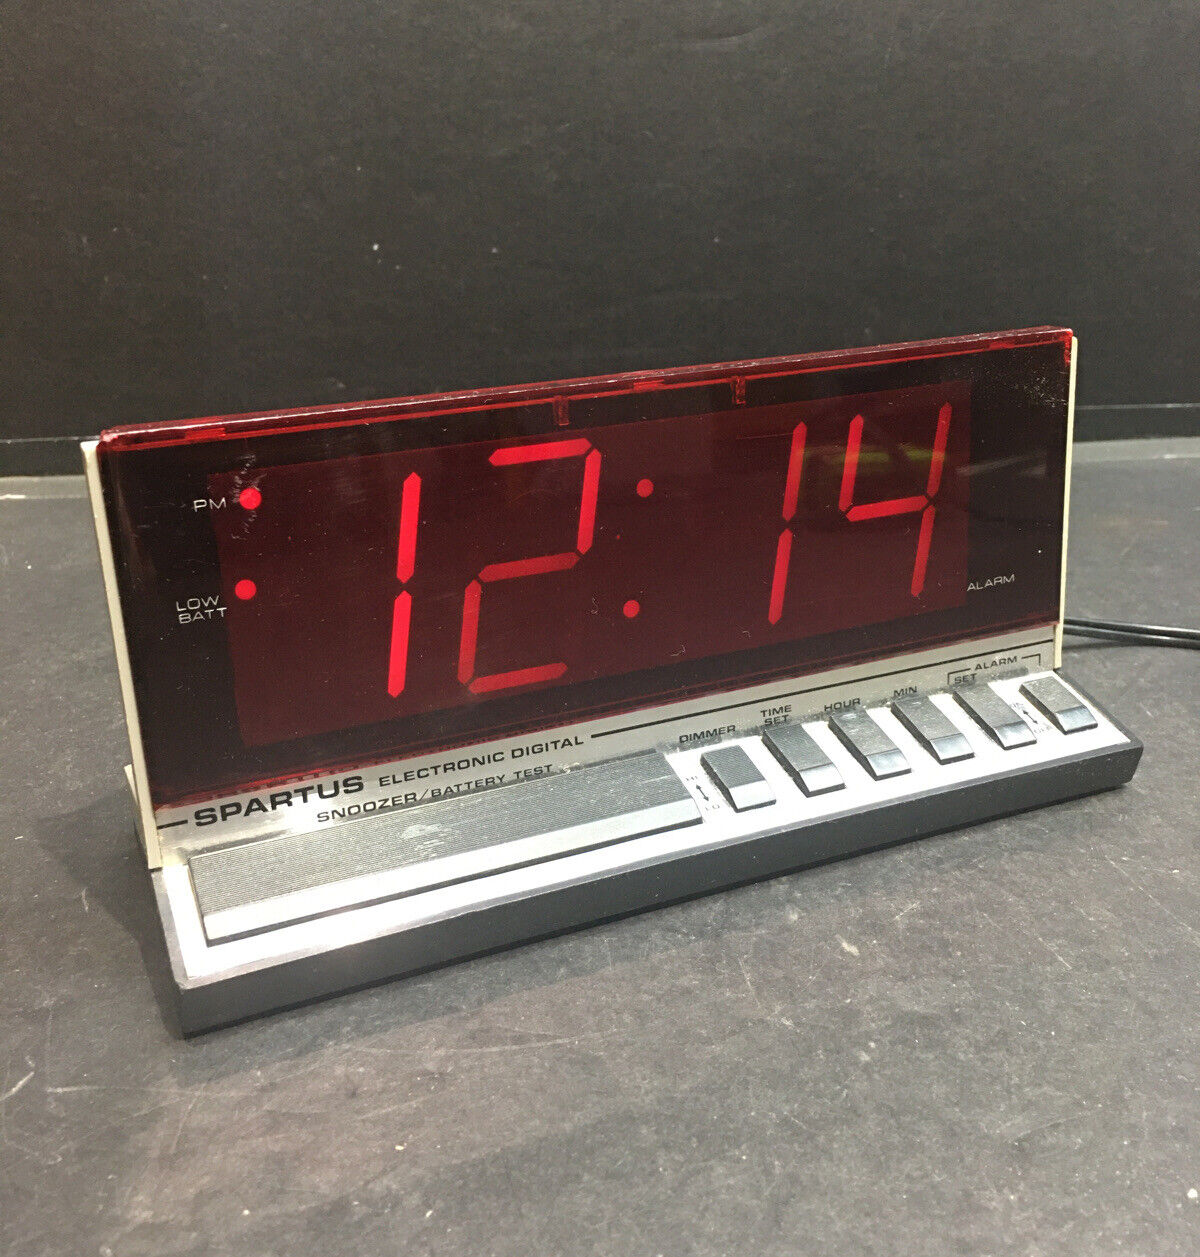 Vintage SPARTUS 1140  Alarm Clock RED led display 1970's/1980s TESTED NICE